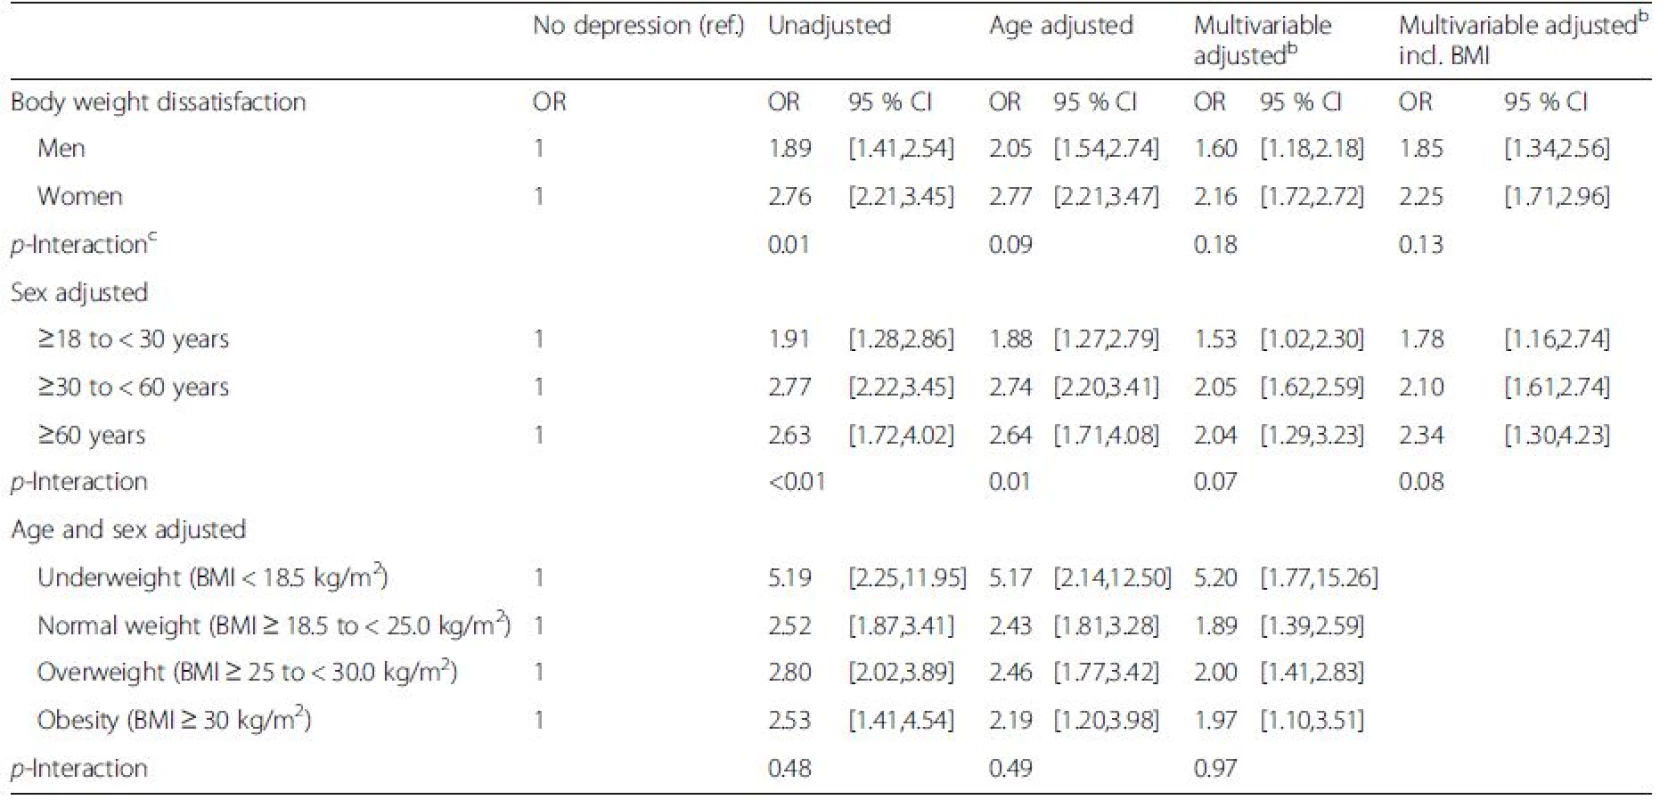 Association between body weight dissatisfaction and depression stratified by sex, age and body mass index; 2012 Swiss Health Survey<sup>a</sup>